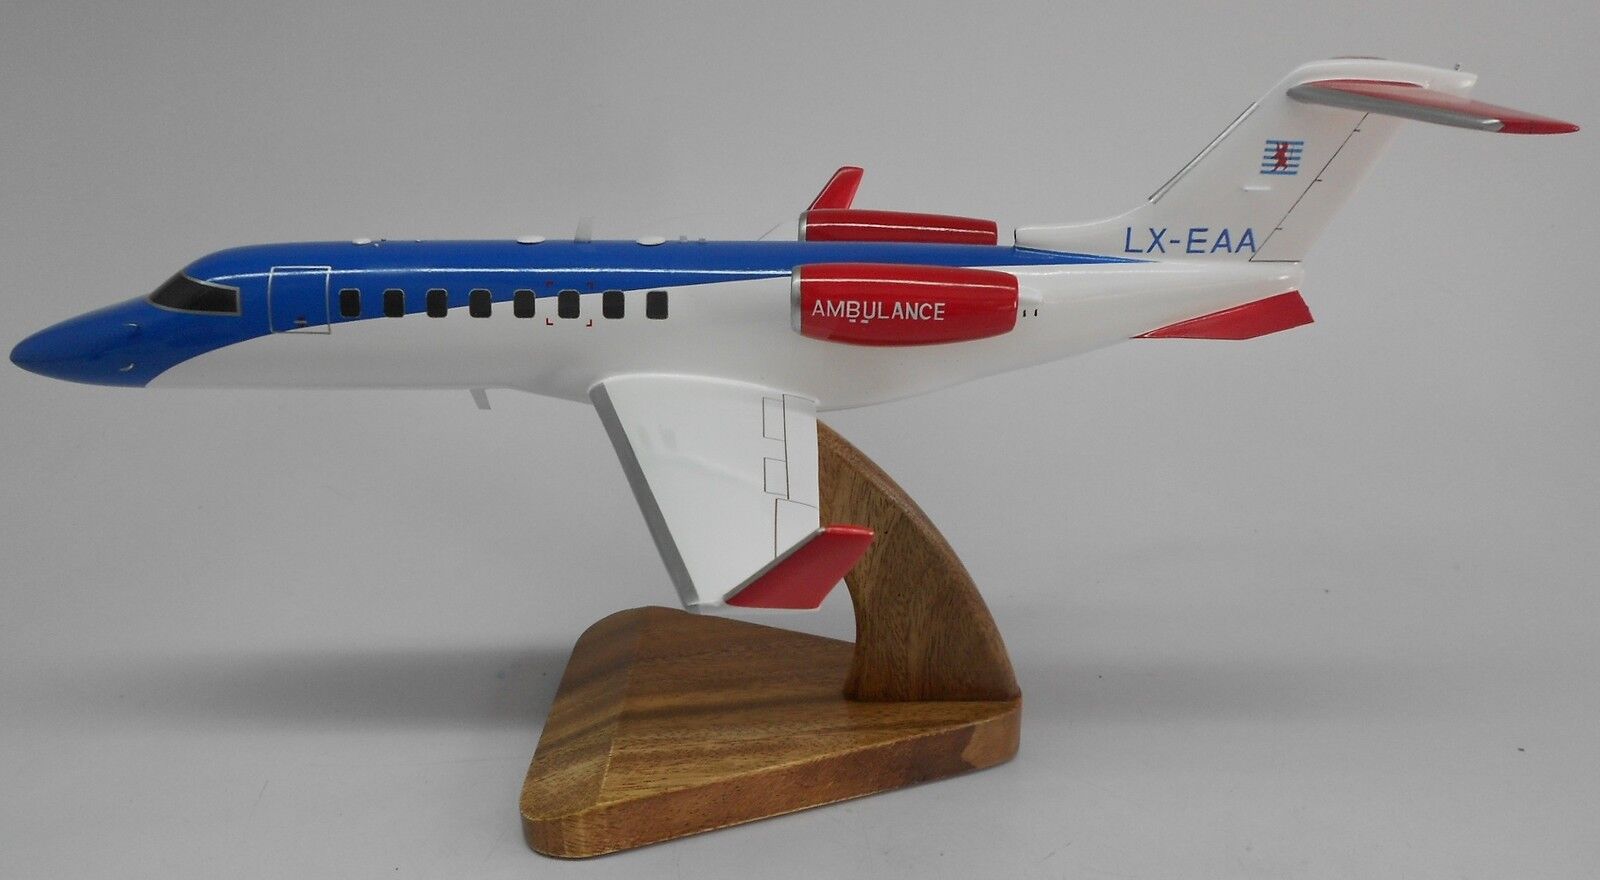 Learjet 45 Luxembourg Air Rescue Bombardier Airplane Wood Model Replica Small